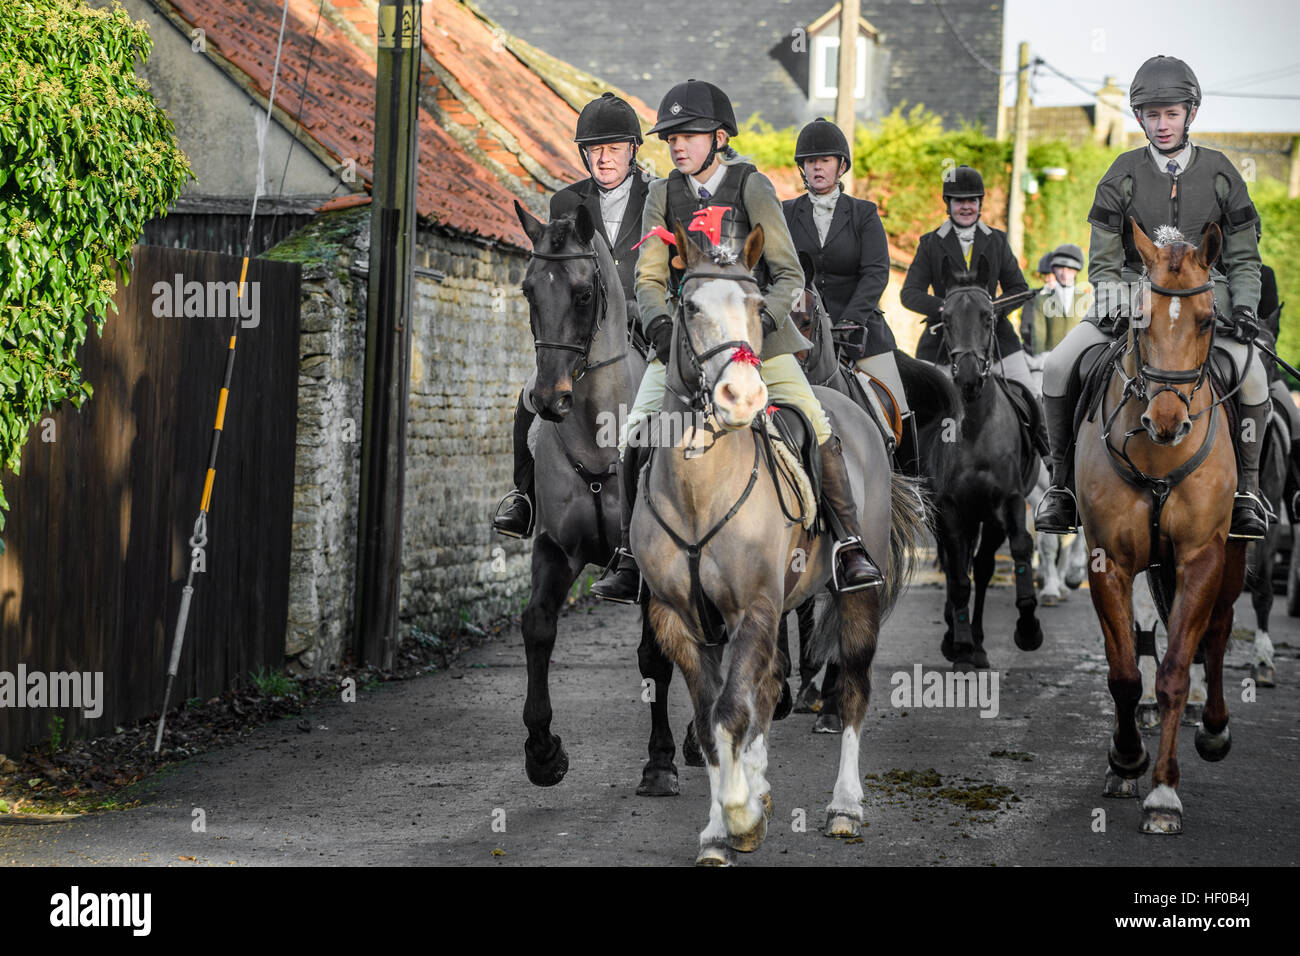 Brigstock, Northamptonshire, UK. 26th Dec, 2016. Riders and horses at the Boxing day hunt organised by the Pytchley Hunt at Brigstock, Northamptonshire, England, on 26 December 2016 © miscellany/Alamy Live News Stock Photo